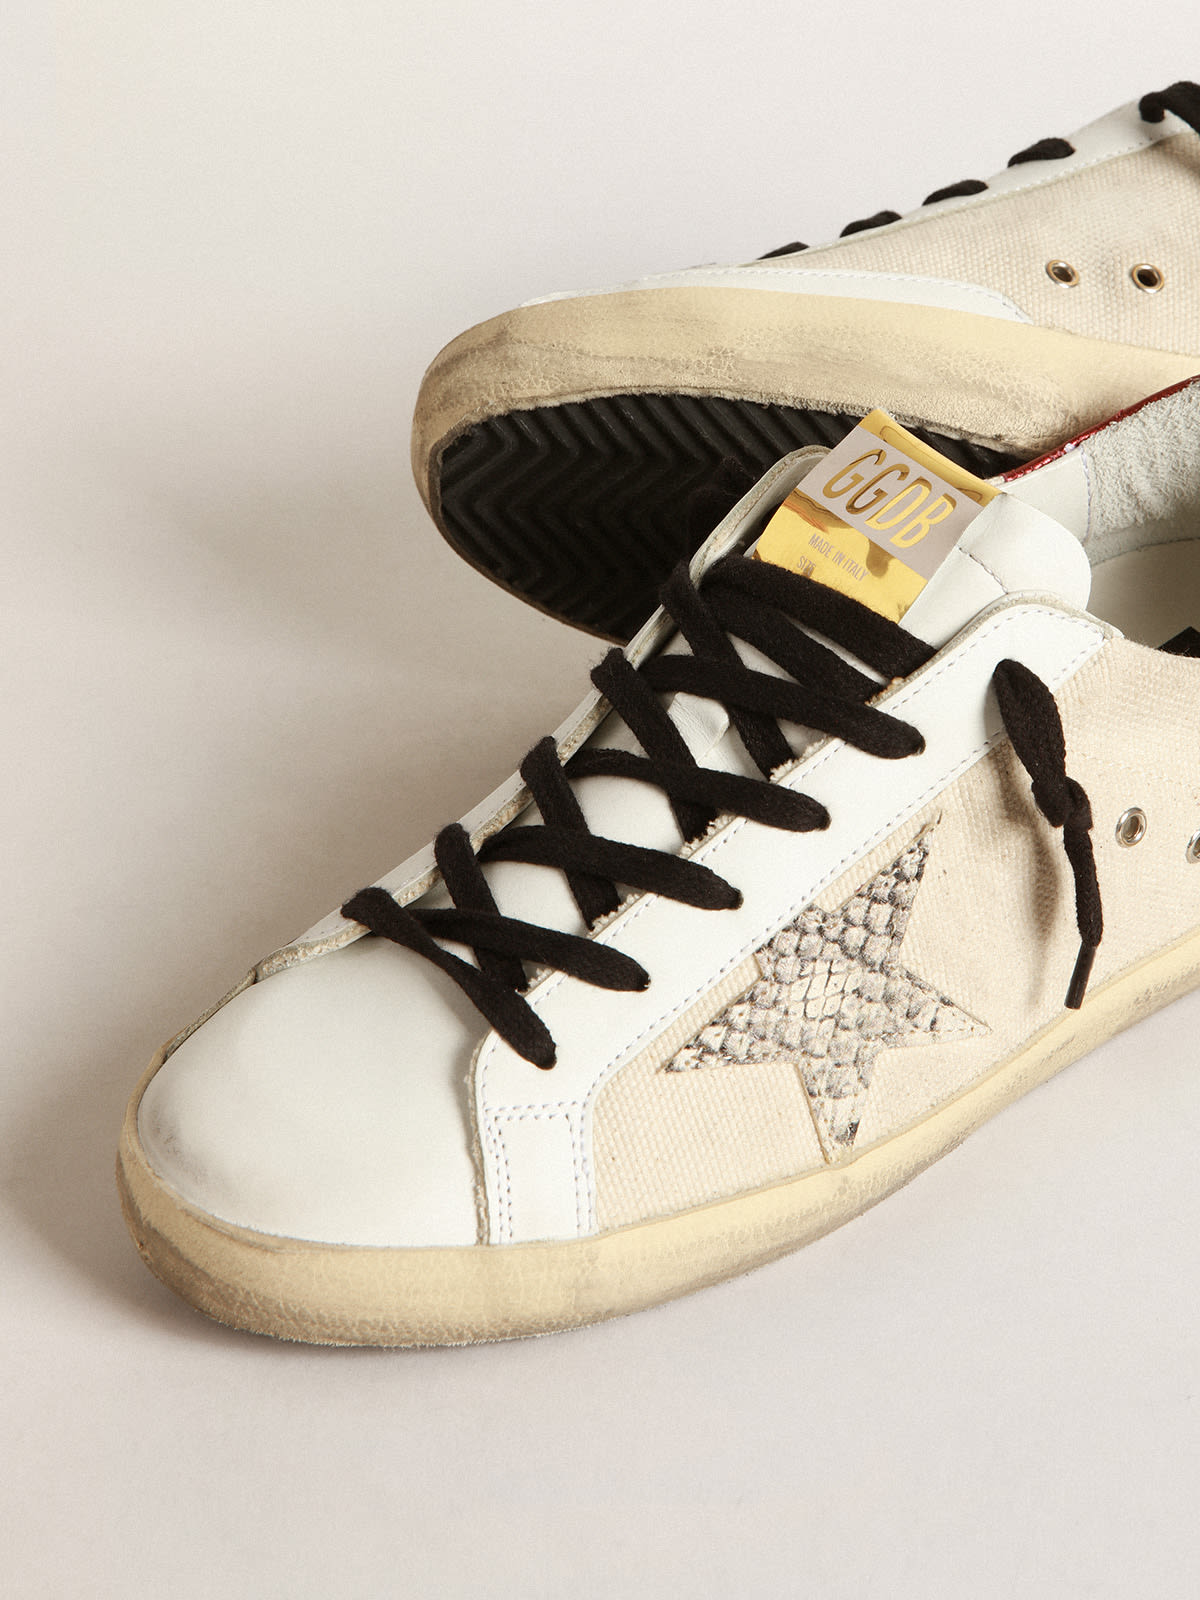 Golden Goose - Super-Star LTD sneakers in natural-white canvas with gray snake-print leather star and burgundy laminated leather heel tab in 